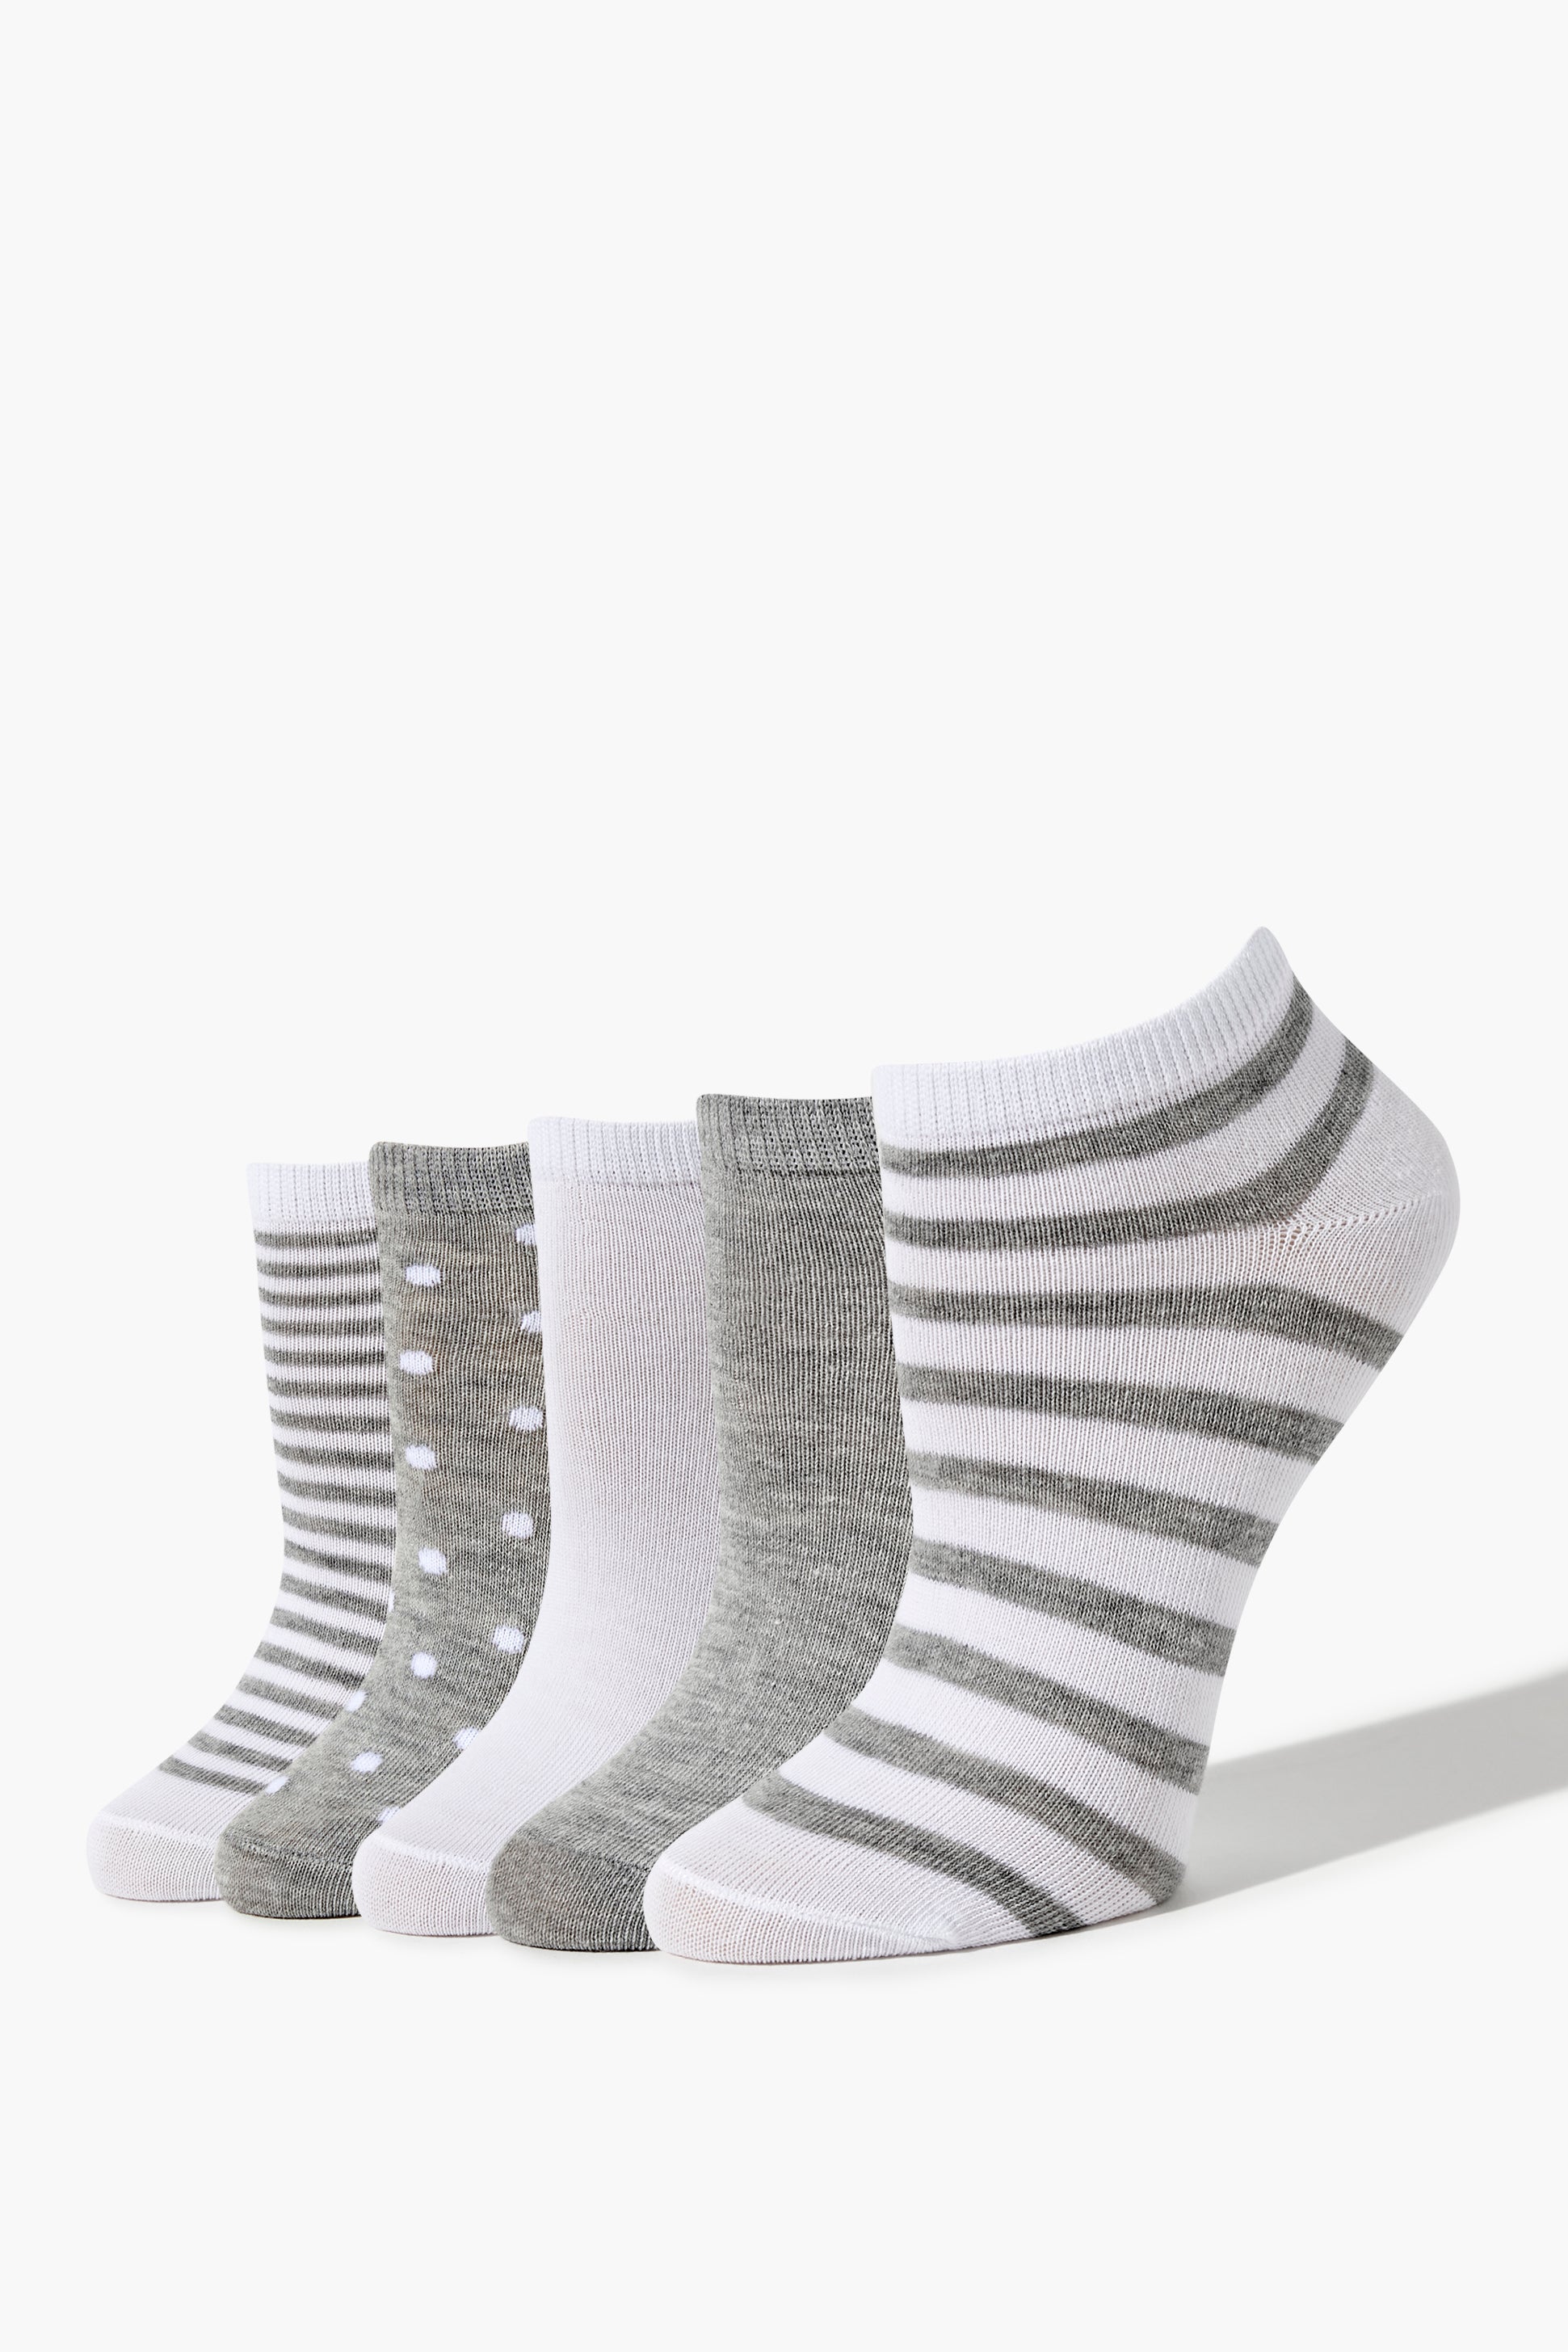 Assorted Ankle Sock Set - 5 Pack